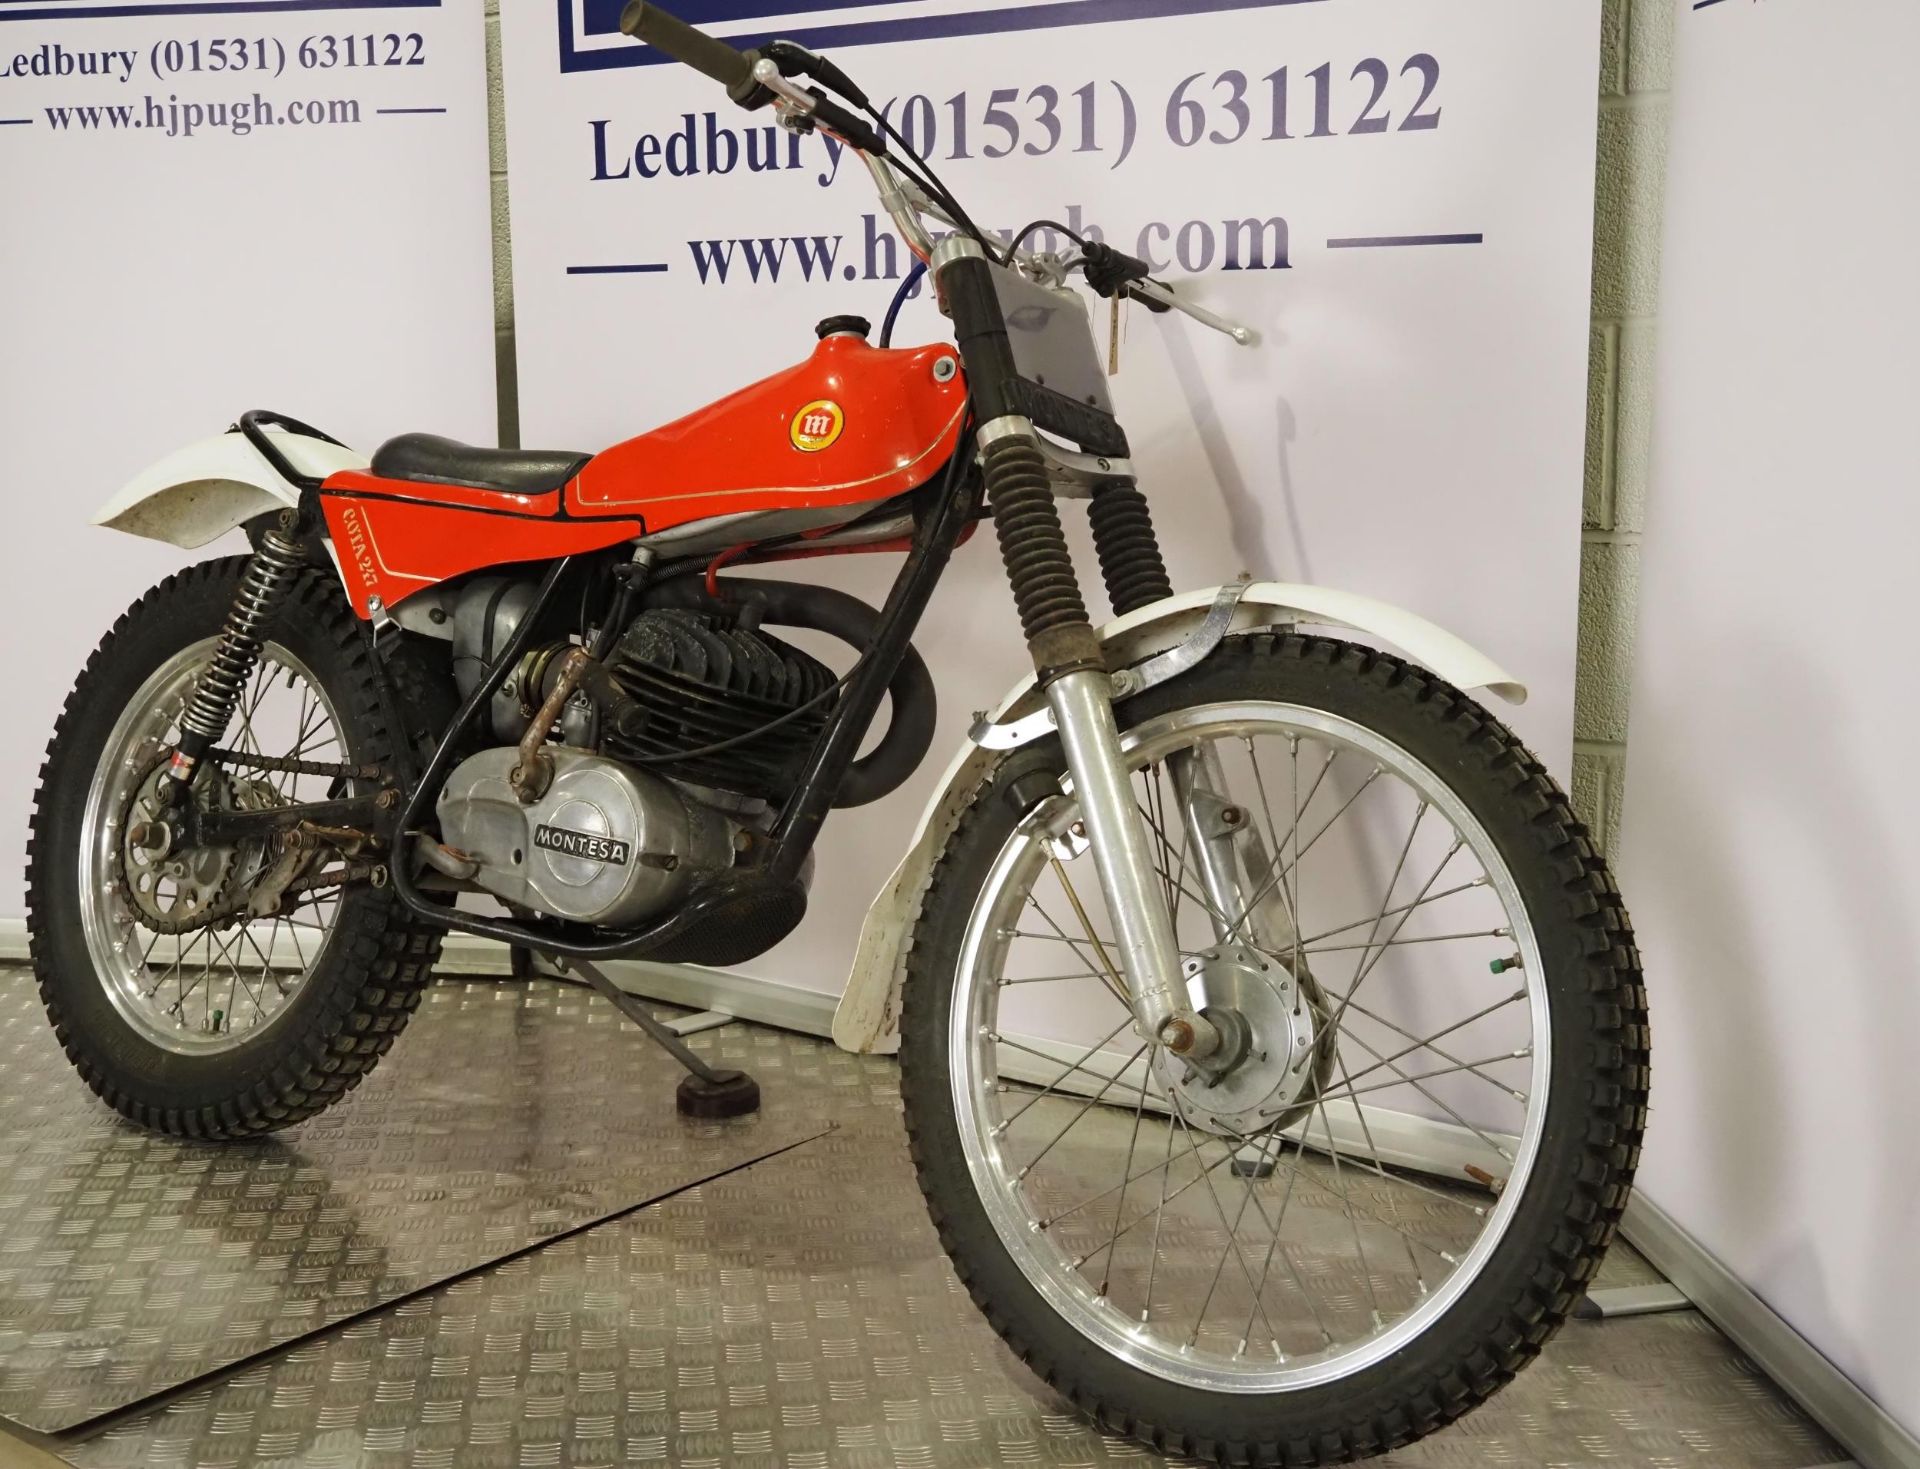 Montesa Cota 247 trials motorcycle. 1971. 247cc Engine No. 21M25917 Engine turns over. Has been - Image 2 of 6